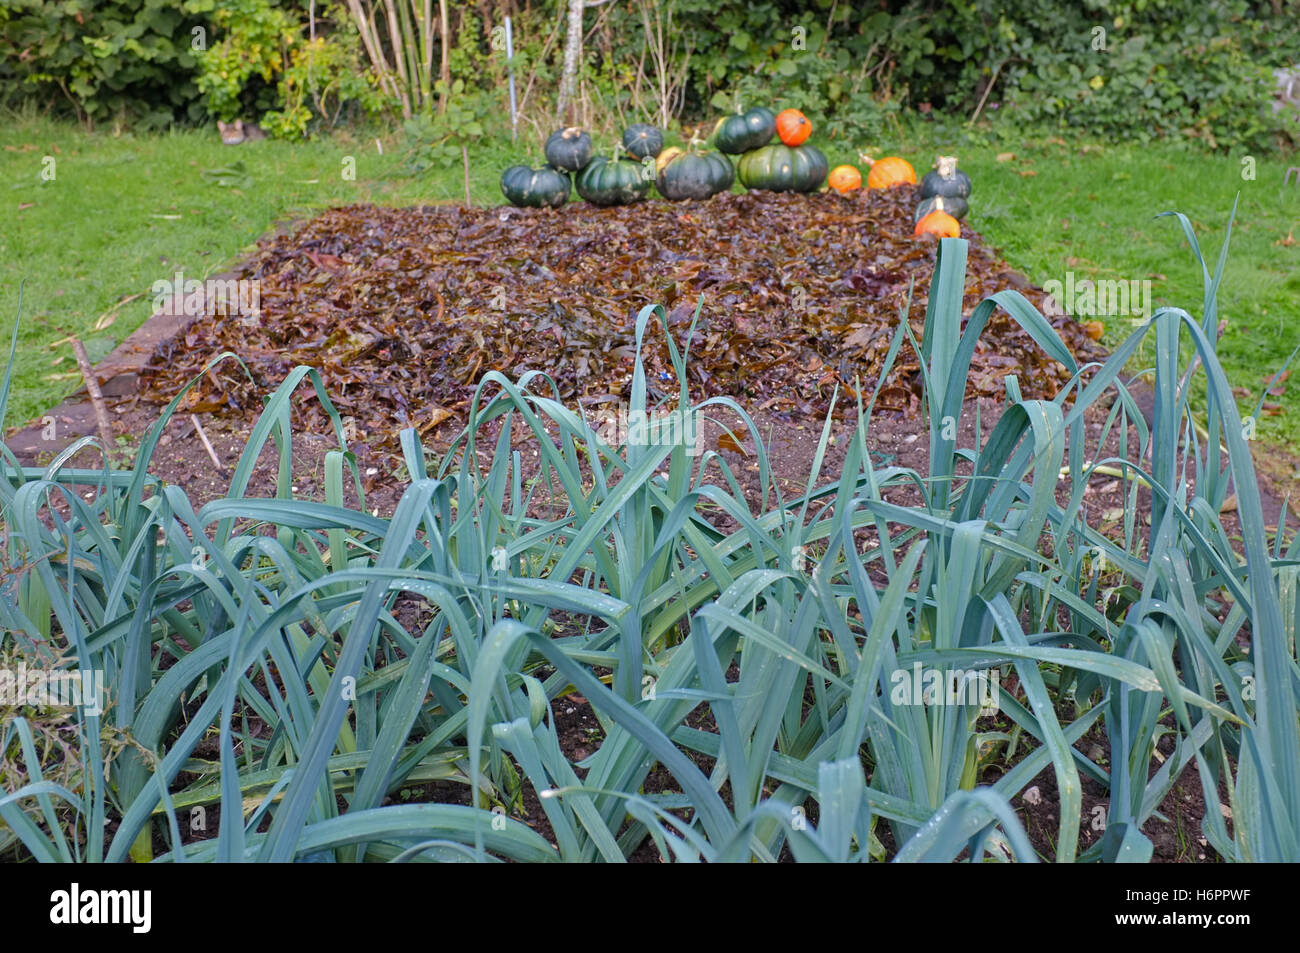 Harvested pumpkins/squash on the edge of a raised bed which has been covered in seaweed with leaks growing in the foreground. Stock Photo